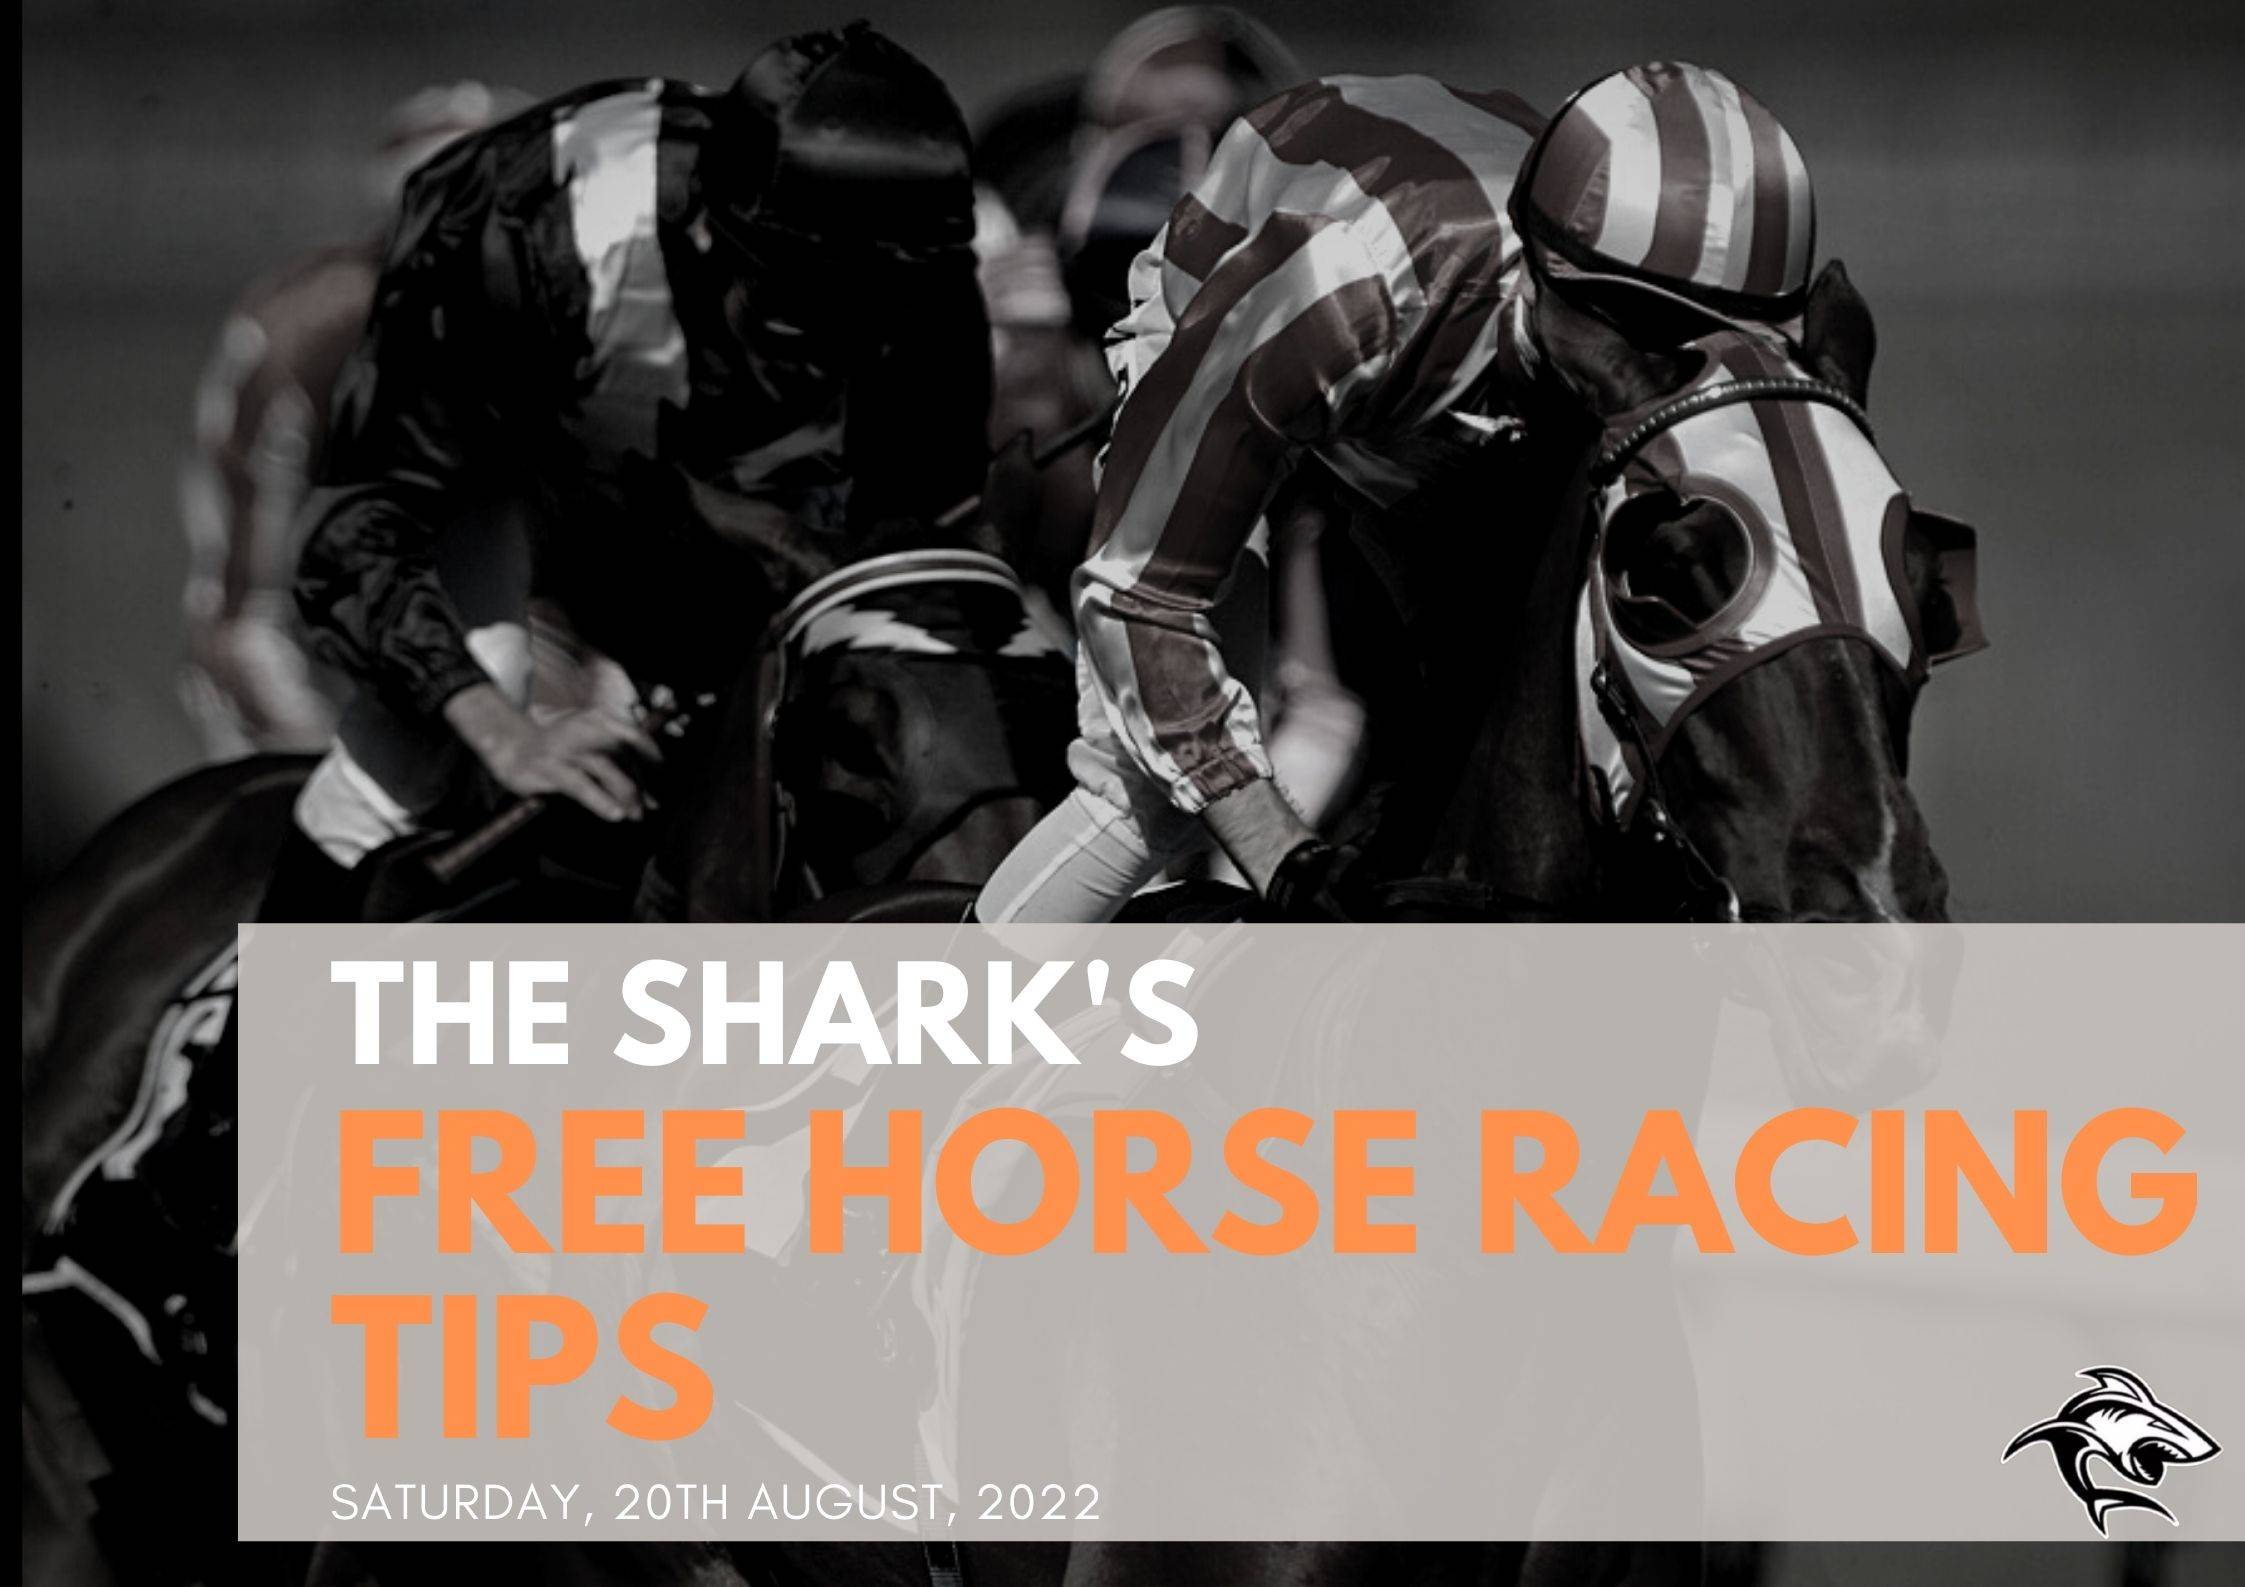 Free Horse Racing Tips - 20th Aug